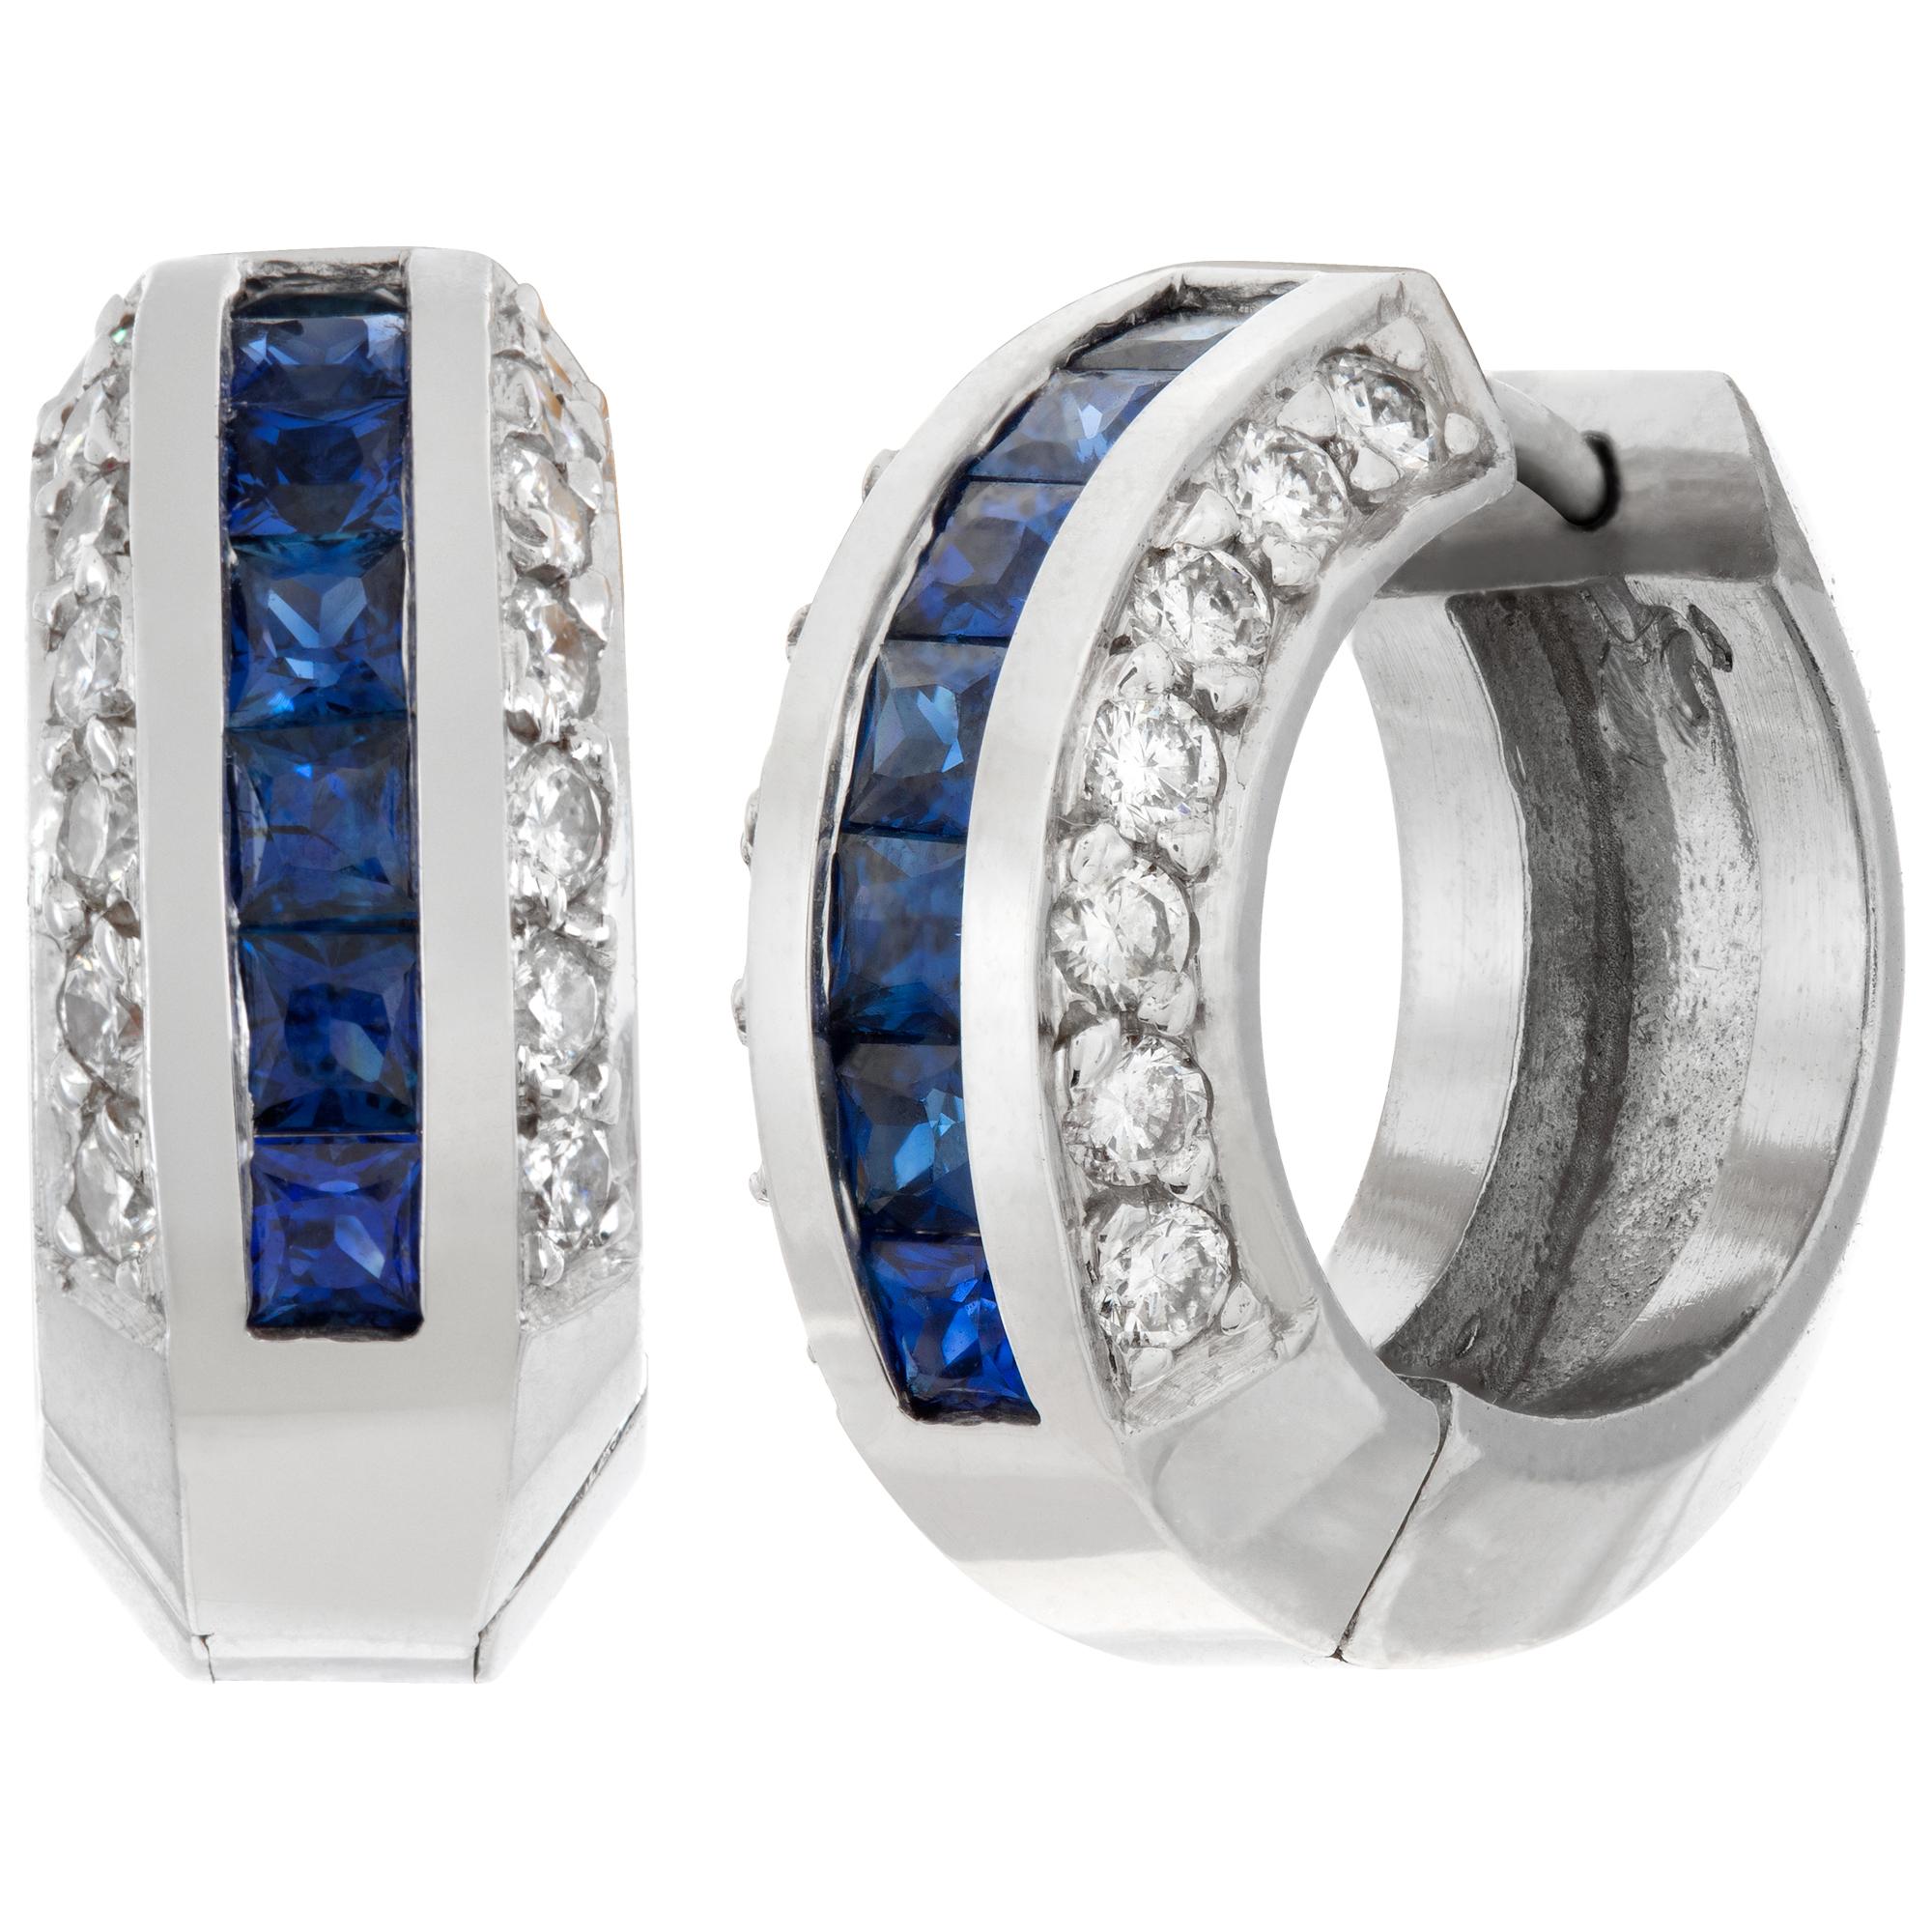 Diamond & sapphire huggie earrings in 18k white gold, approx. 0.30 cts in square cut sapphires & 0.30 carats in diamonds. 15mm long x 6mm wide